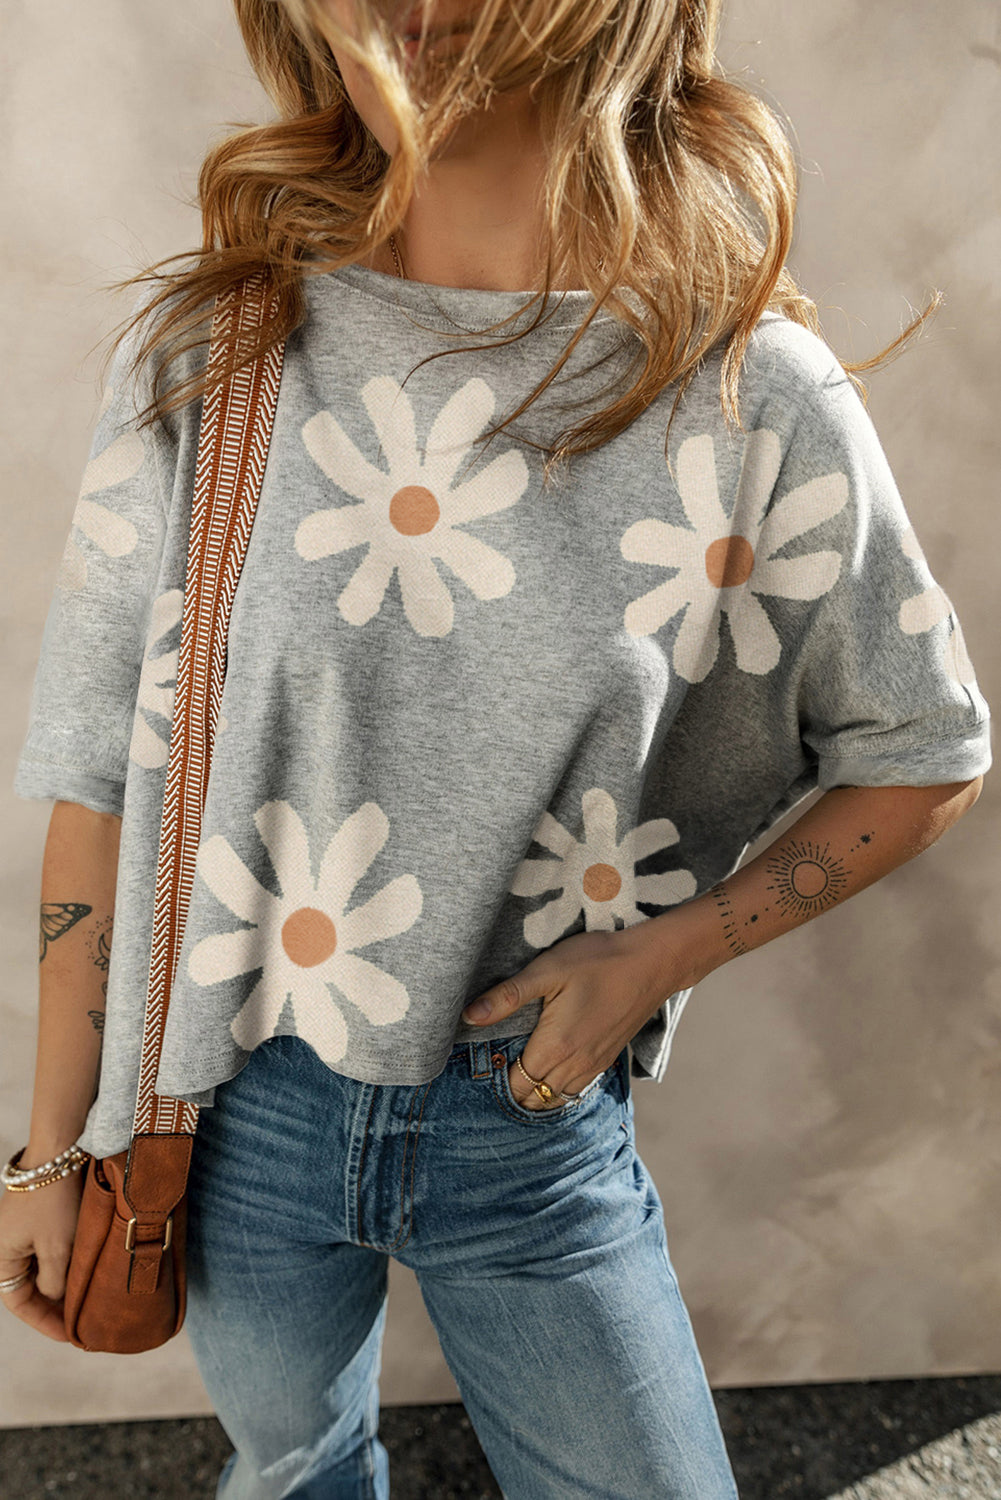 Daisy Flower Printed Casual T Shirt